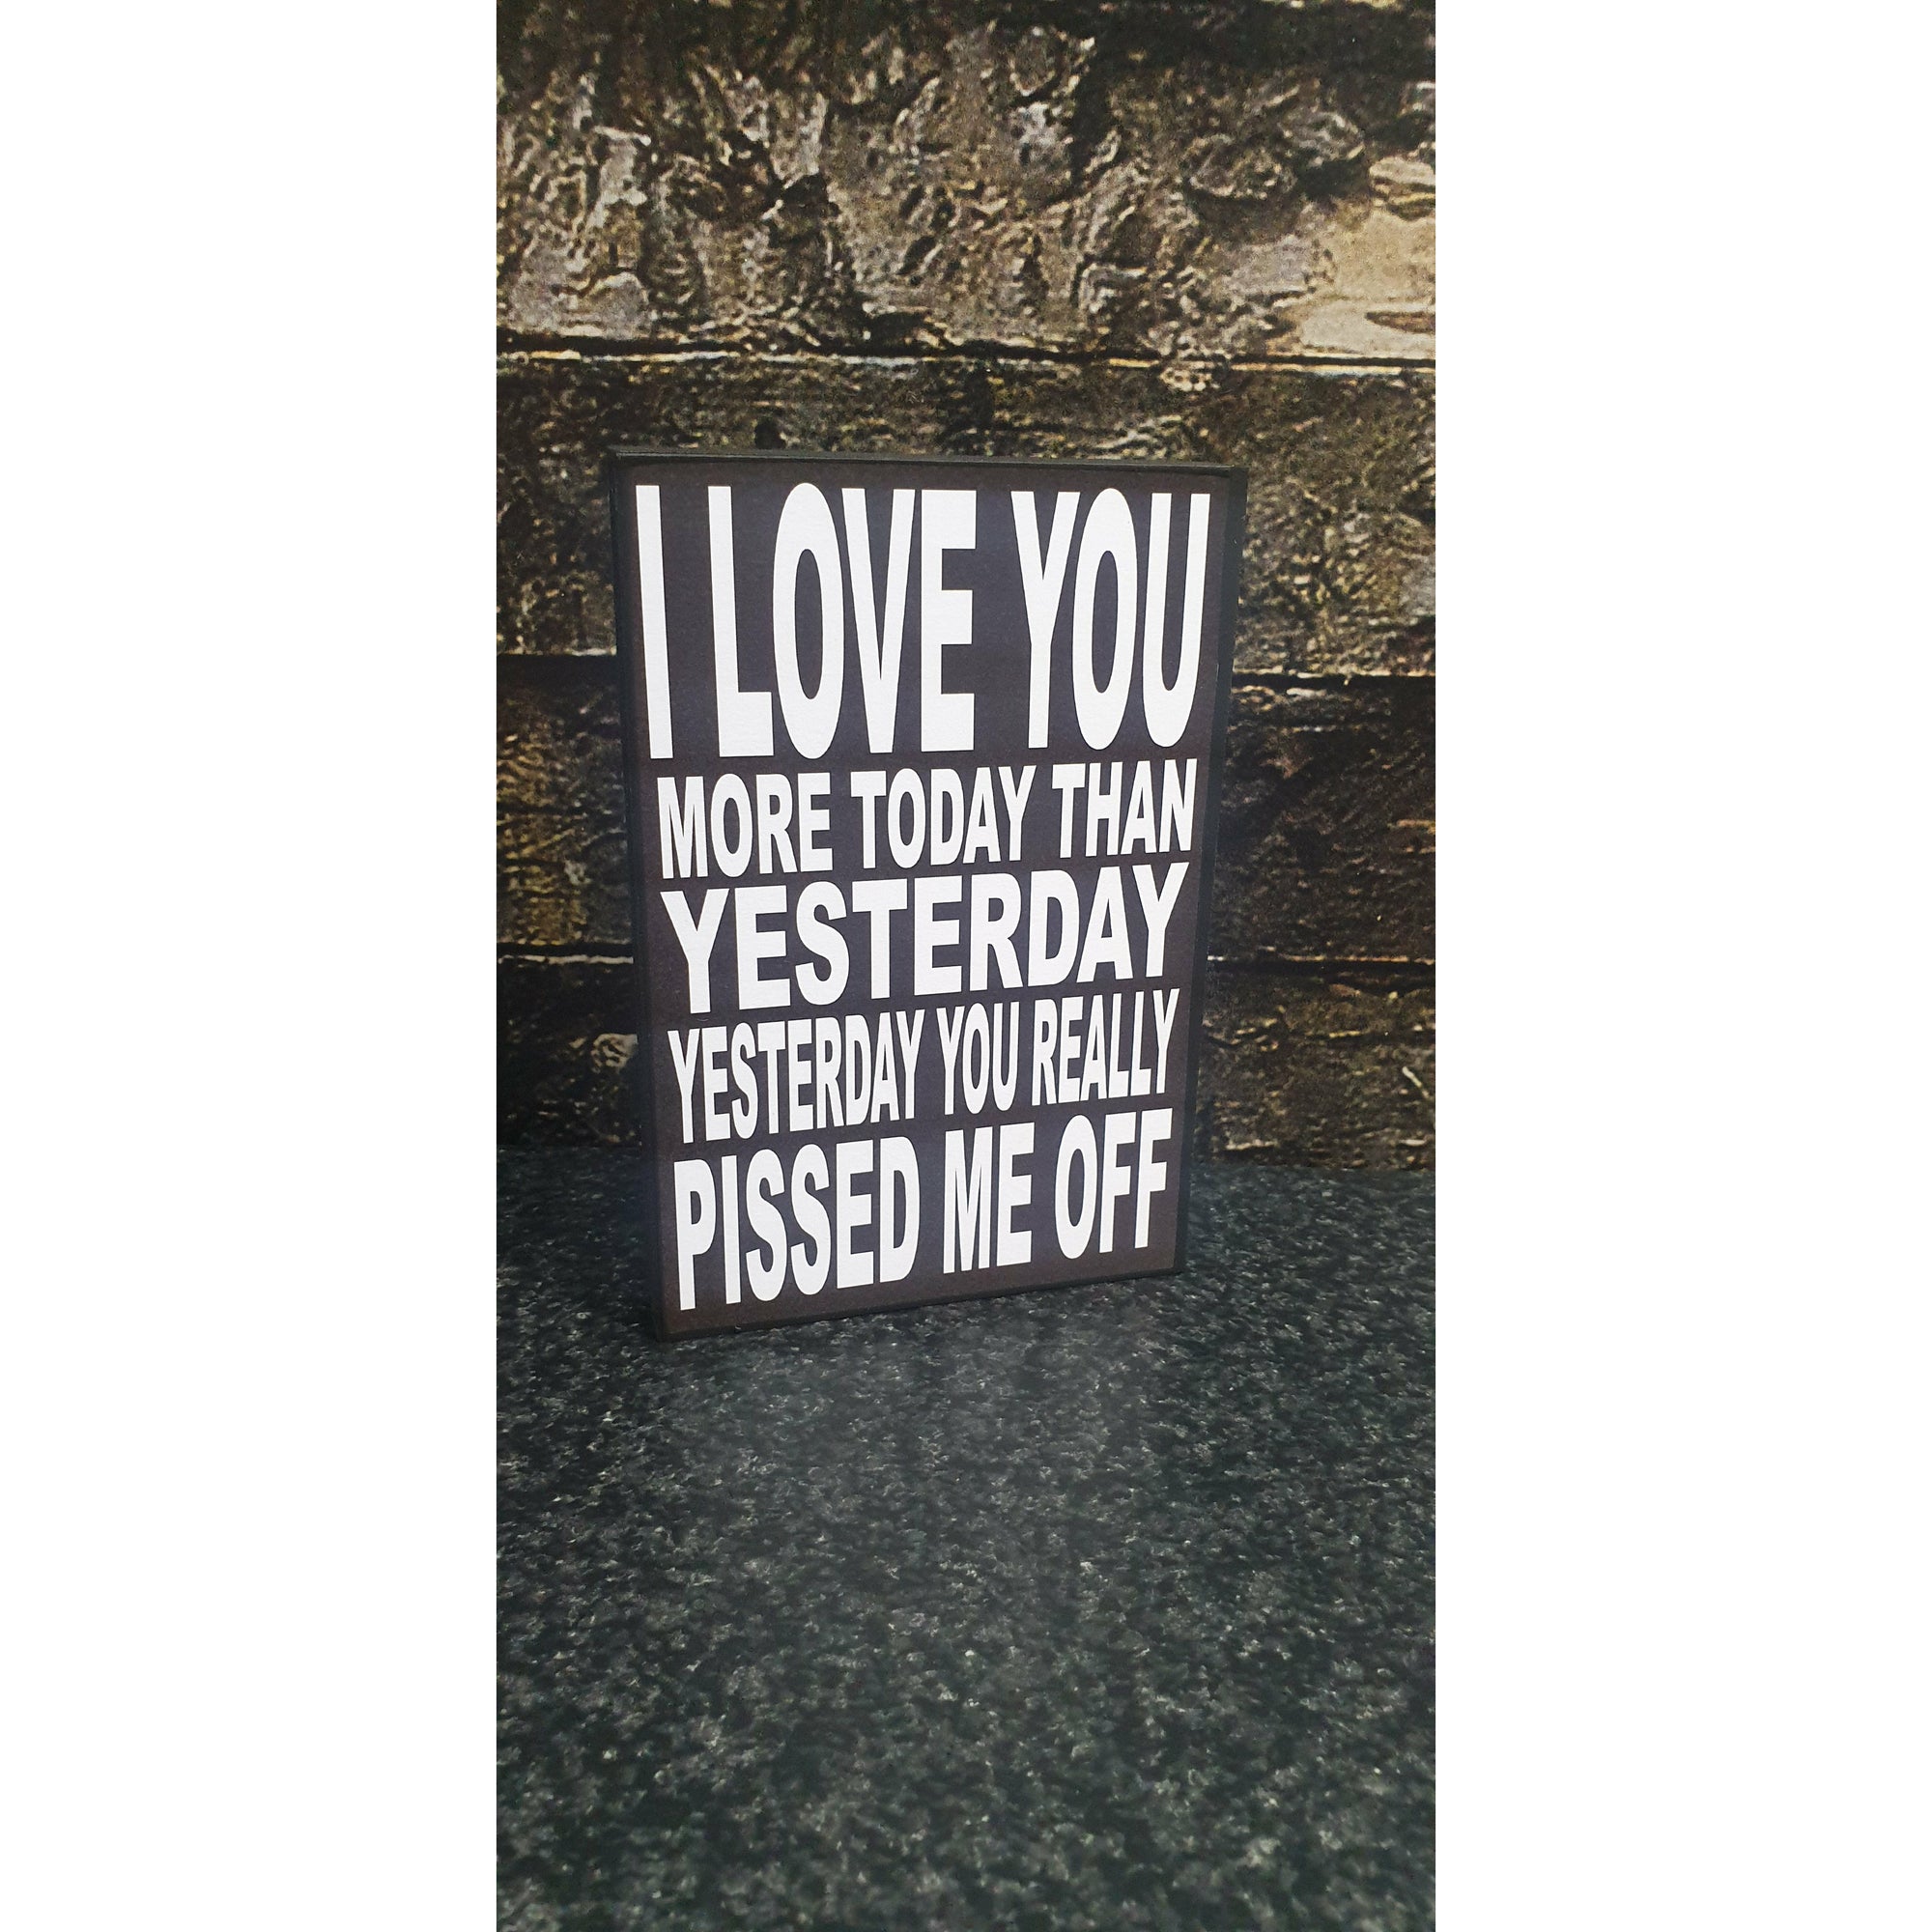 I LOVE YOU MORE TODAY, YESTERDAY 10x15cm Not specified